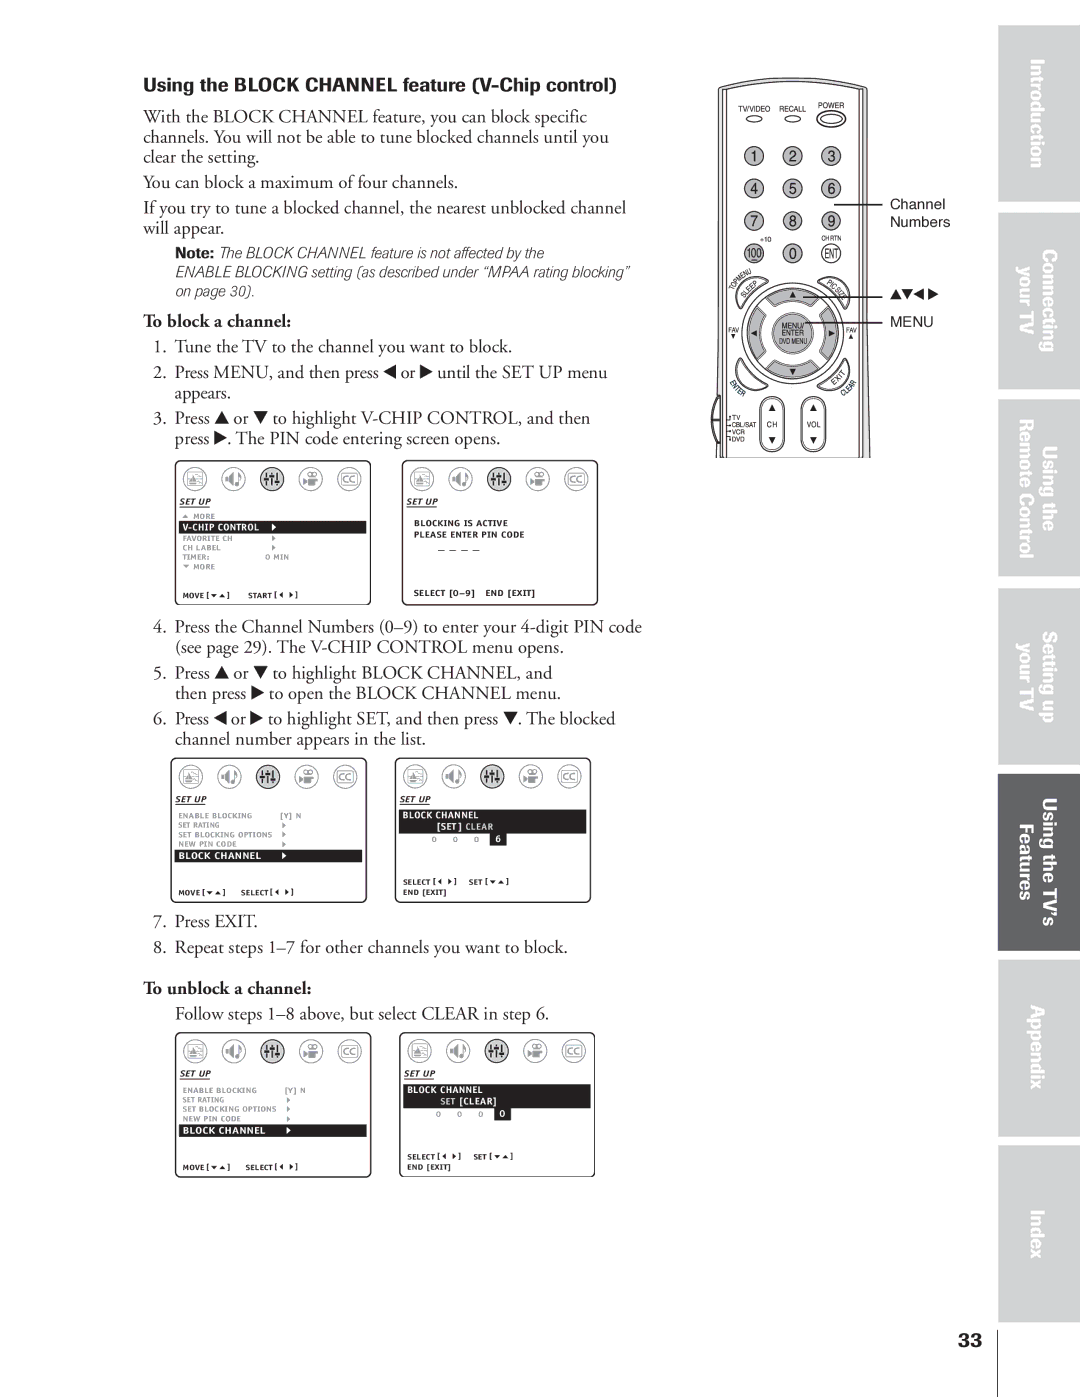 Toshiba 32AF14 owner manual Using the Block Channel feature V-Chip control, To block a channel, To unblock a channel 